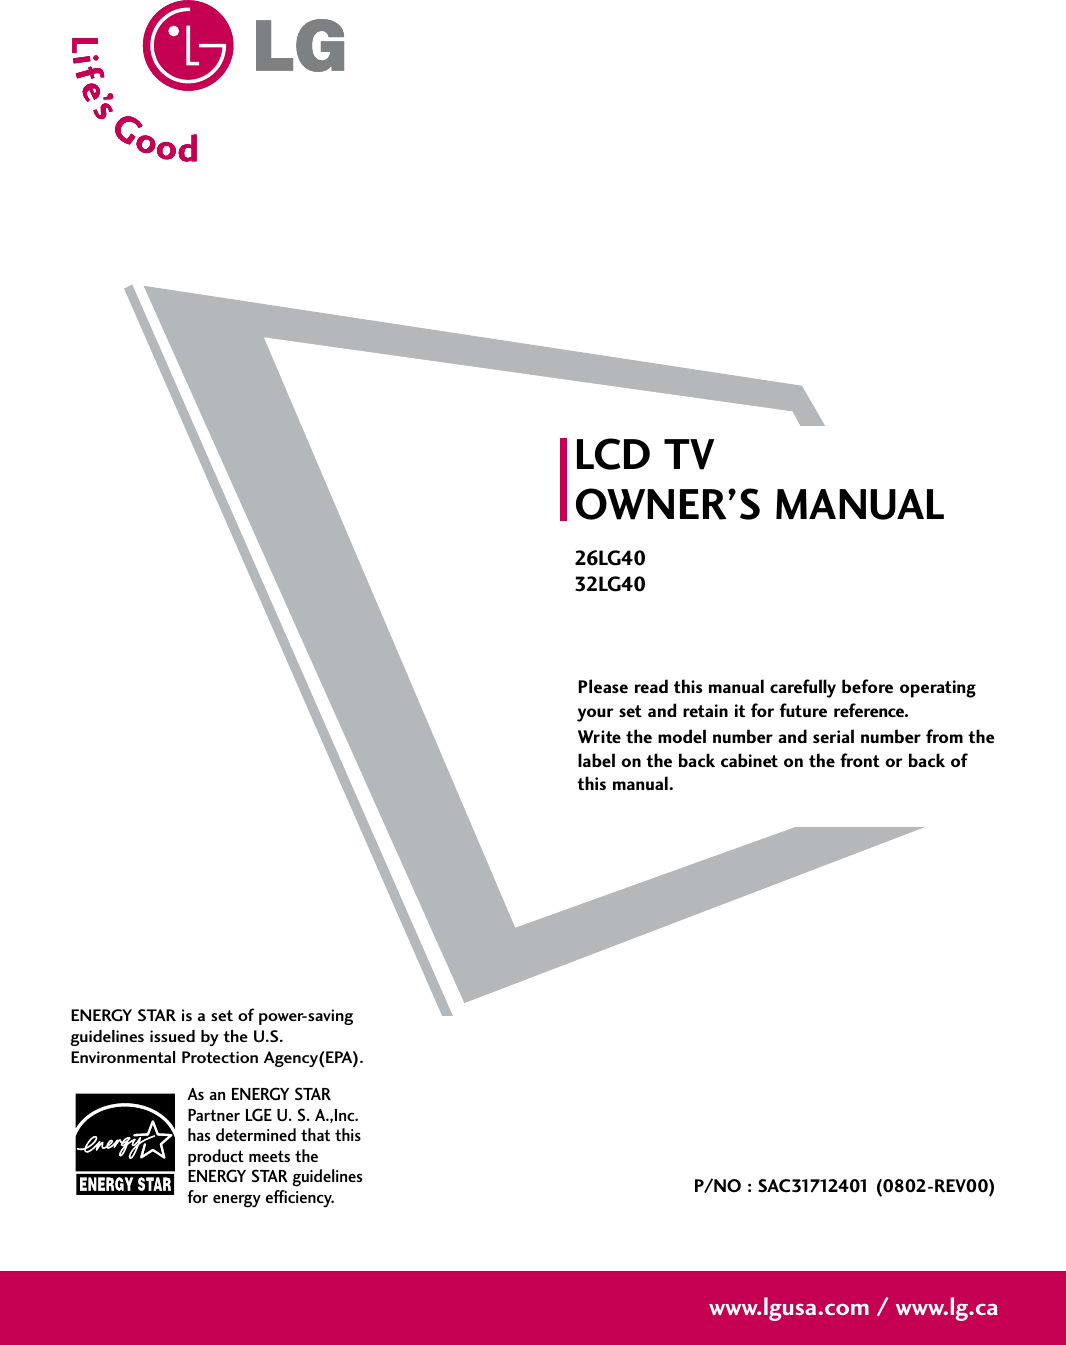 Please read this manual carefully before operatingyour set and retain it for future reference.Write the model number and serial number from thelabel on the back cabinet on the front or back ofthis manual. LCD TVOWNER’S MANUAL26LG4032LG40P/NO : SAC31712401 (0802-REV00)www.lgusa.com / www.lg.caAs an ENERGY STARPartner LGE U. S. A.,Inc.has determined that thisproduct meets theENERGY STAR guidelinesfor energy efficiency.ENERGY STAR is a set of power-savingguidelines issued by the U.S.Environmental Protection Agency(EPA).